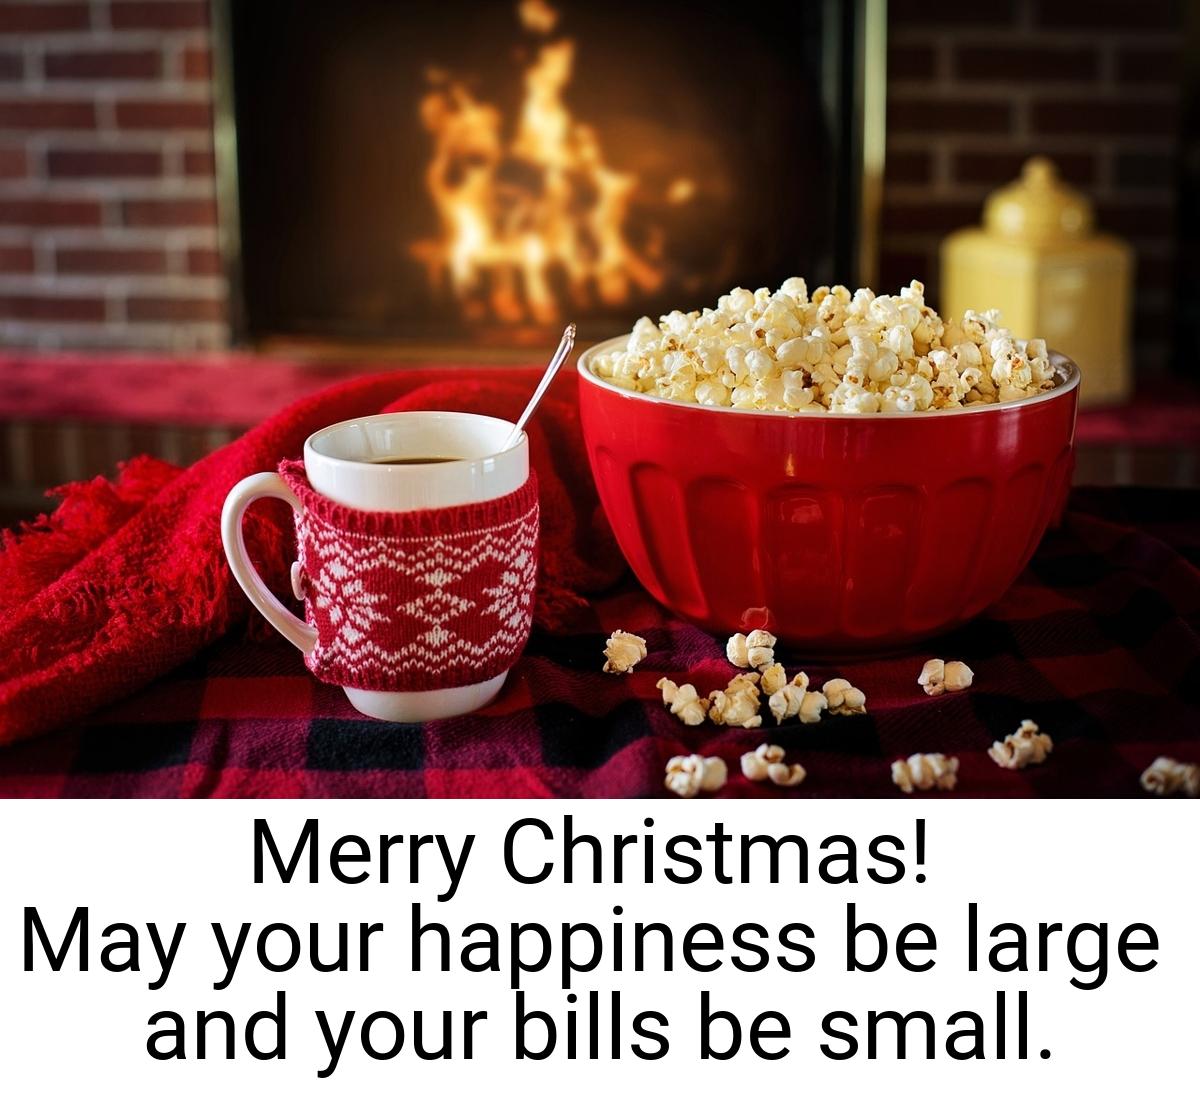 Merry Christmas! May your happiness be large and your bills